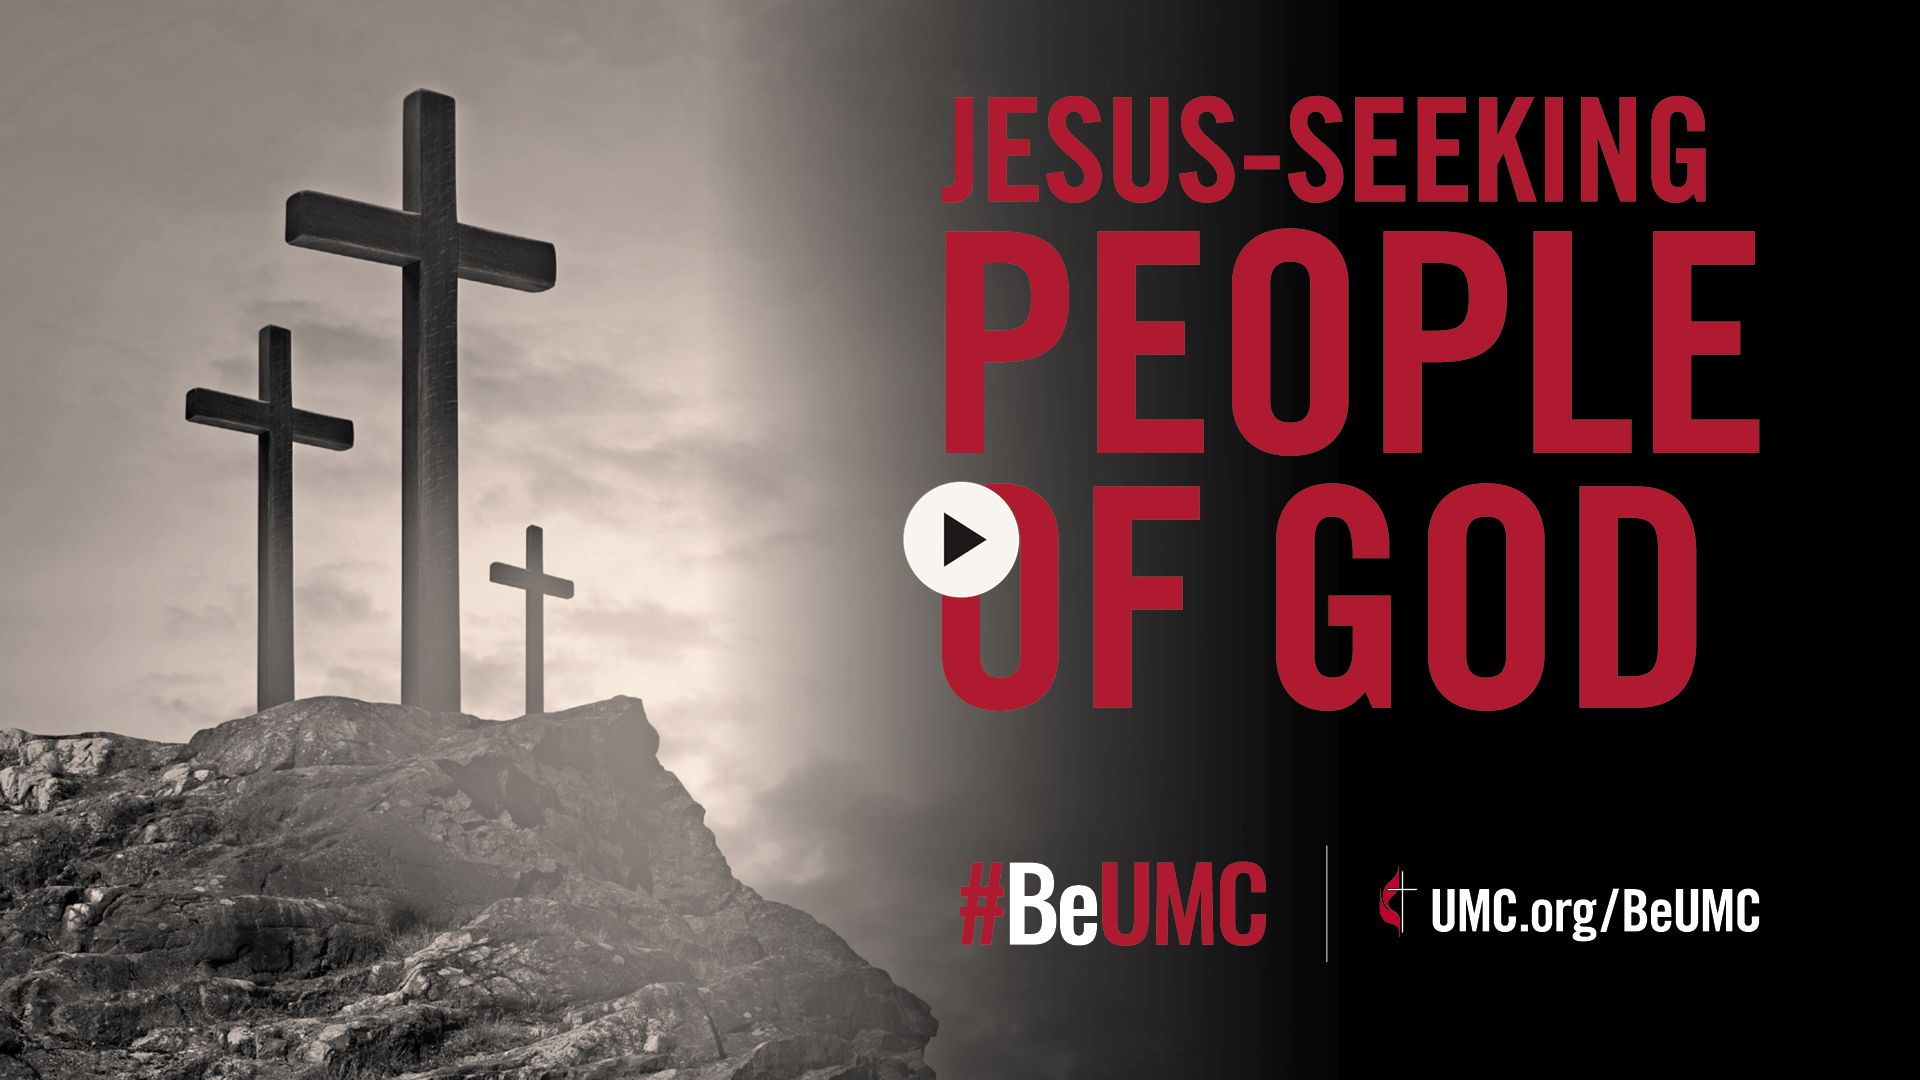 We cherish our deepening relationship with God. The People of God campaign celebrates the core values that connect the people of The United Methodist Church. Image for Jesus-seeking, crosses (video screenshot).